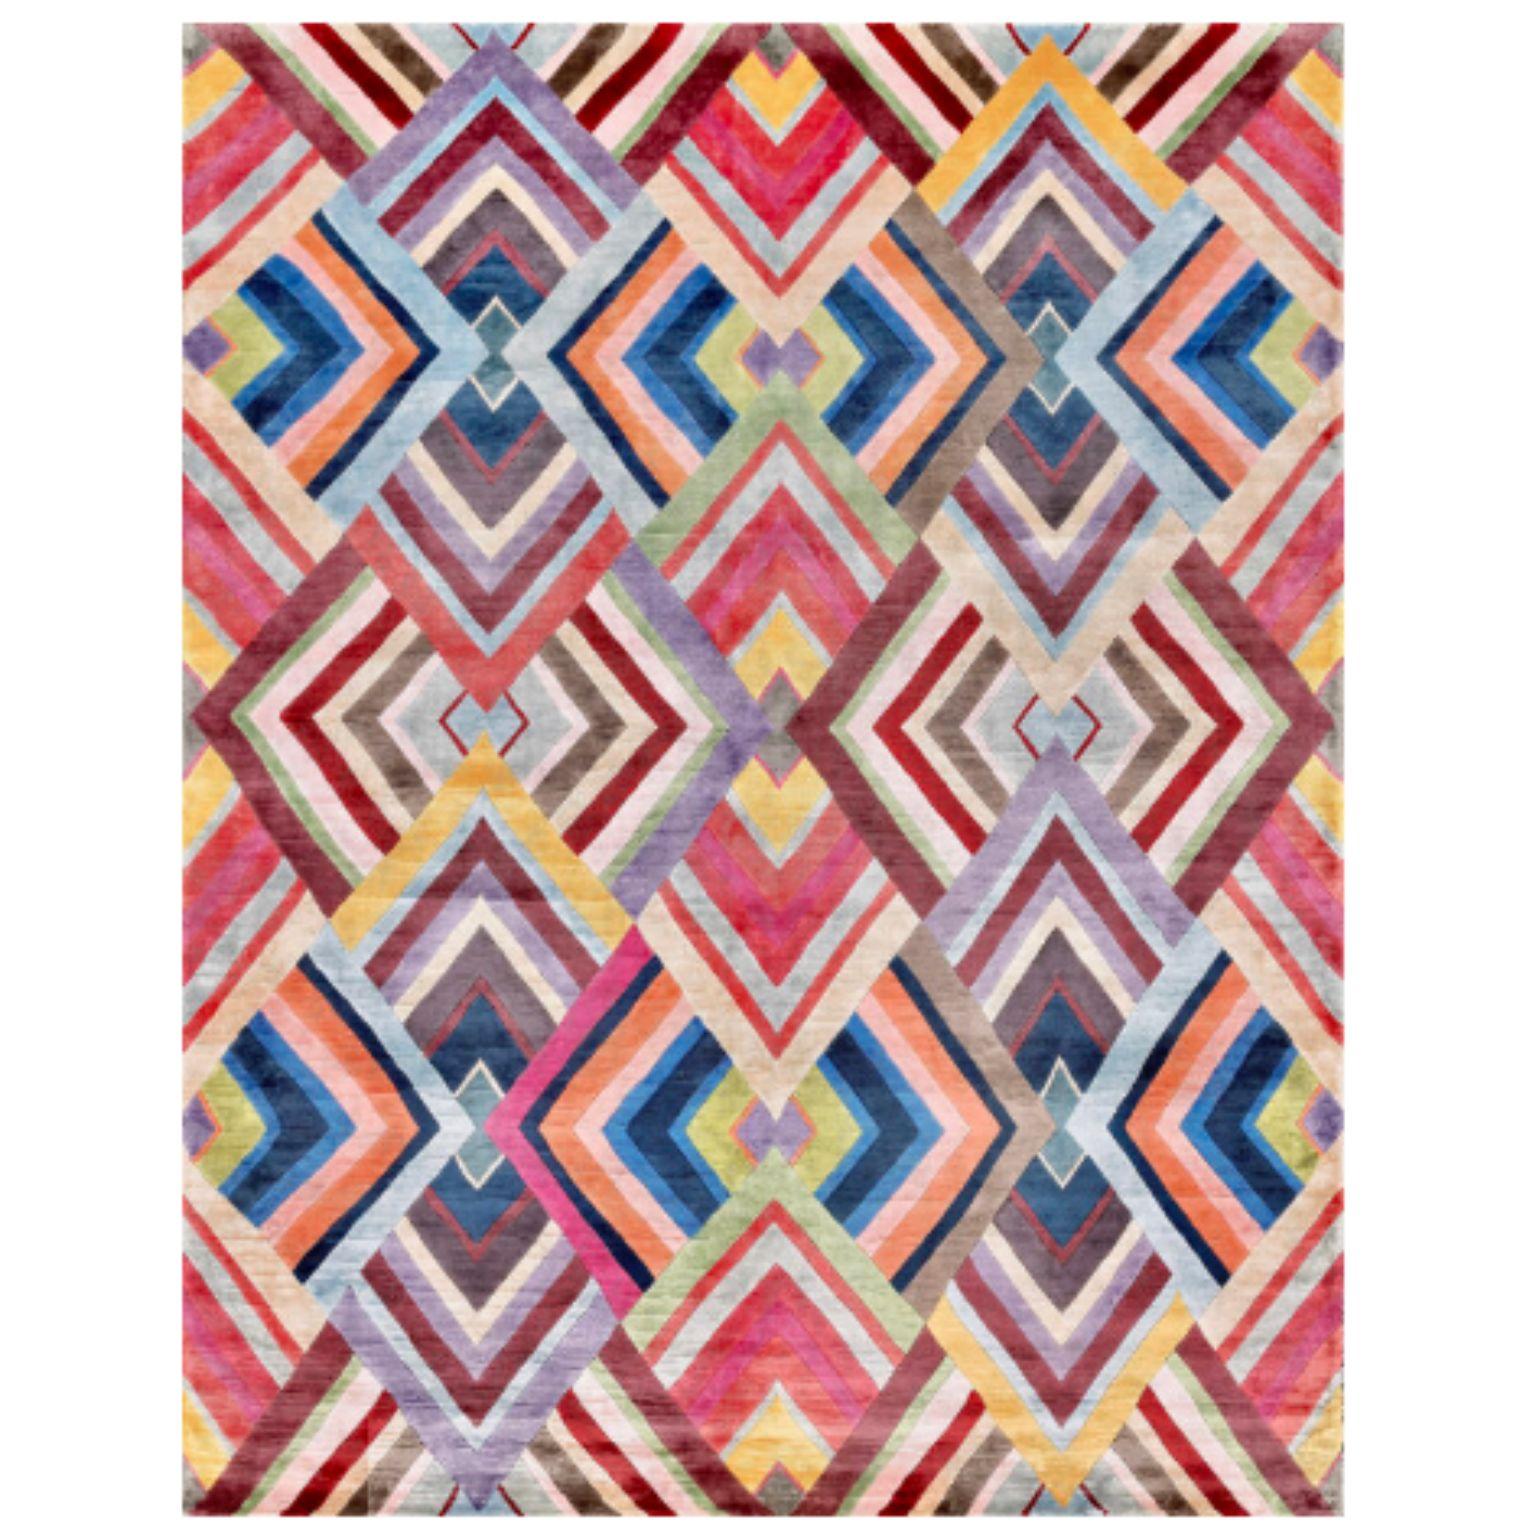 WOODSTOCK 200 Rug by Illulian
Dimensions: D300 x H200 cm 
Materials: Silk 100%
Variations available and prices may vary according to materials and sizes. Please contact us.

Illulian, historic and prestigious rug company brand, internationally